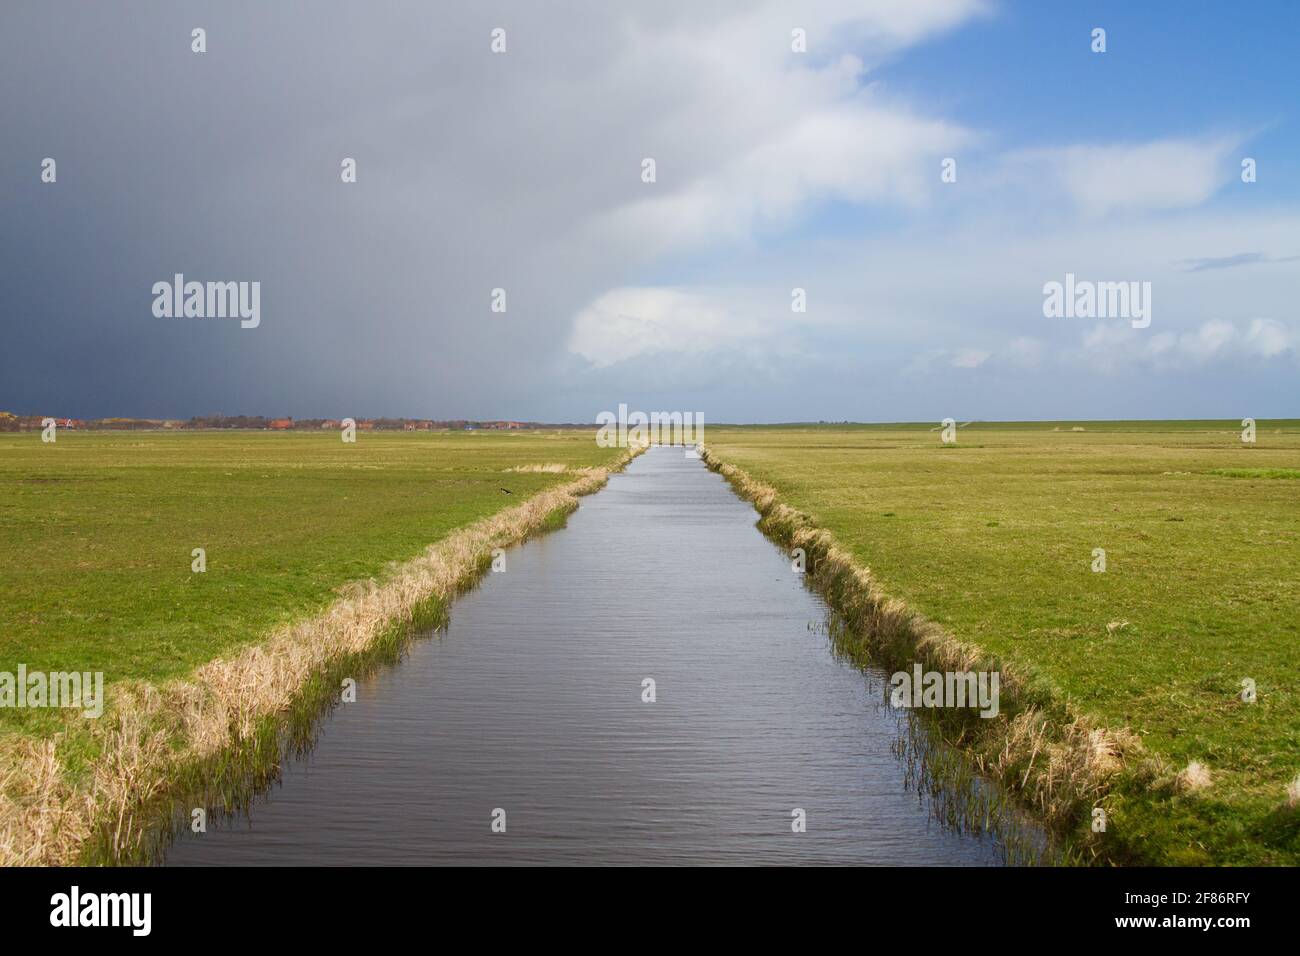 Storm front approaching over rural landscape on the Dutch island Terschelling: dark threatening clouds above a flat polder landscape with a canal Stock Photo